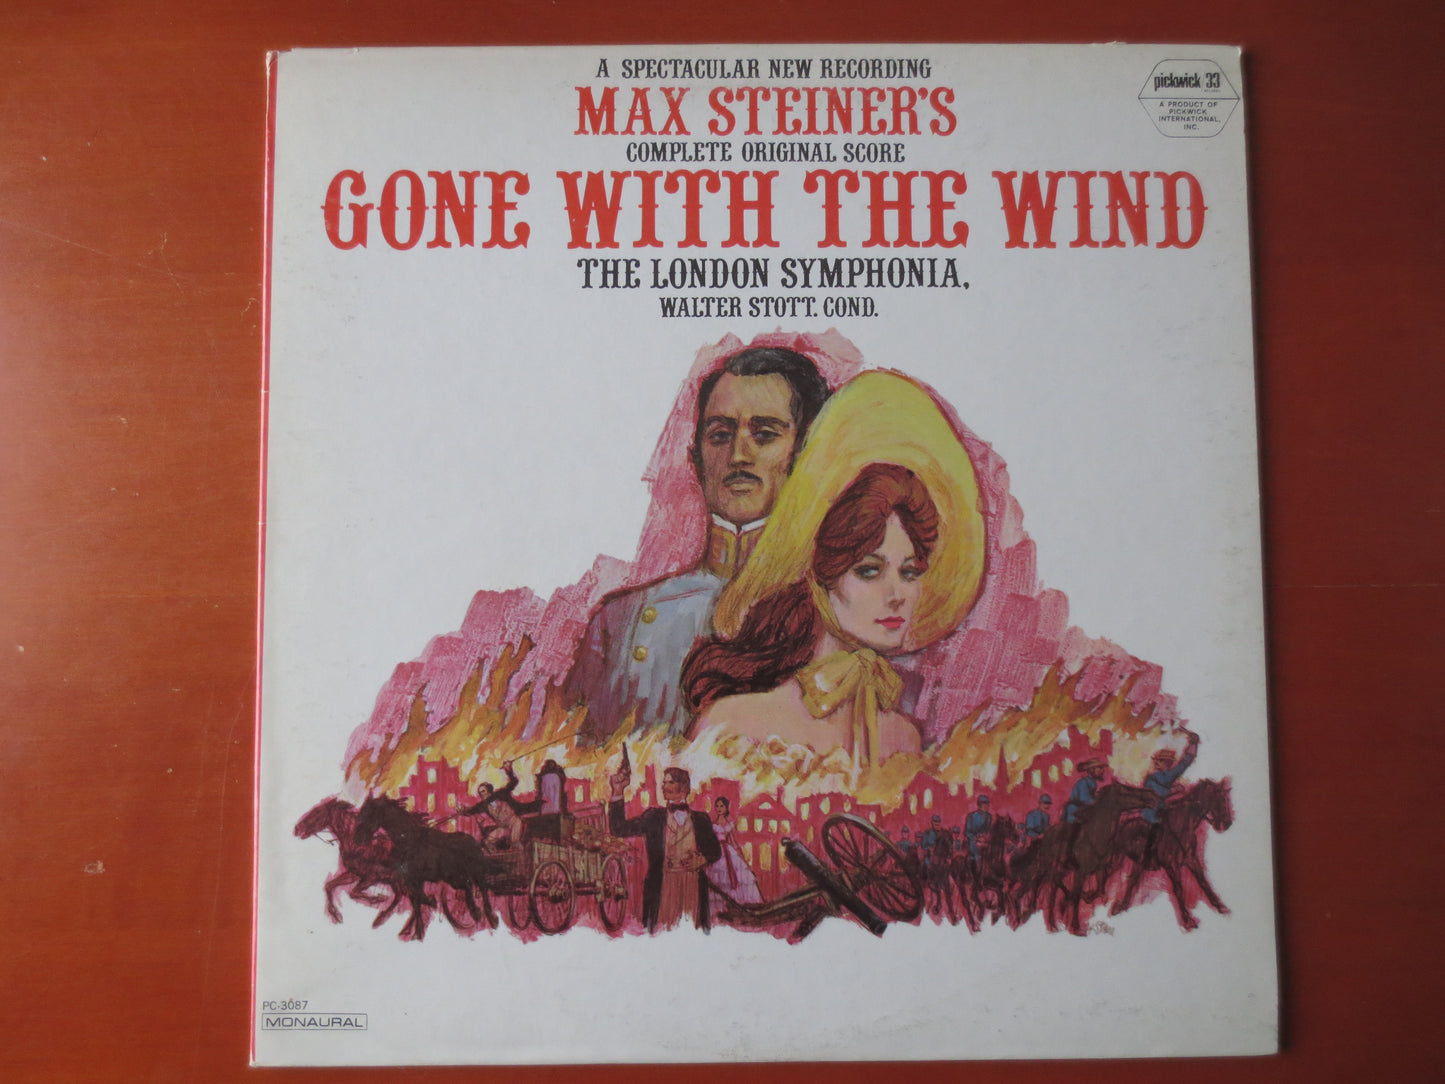 GONE with the WIND, SOUNDTRACK Albums, Movie Records, Vintage Vinyl, Record Vinyl, Records, Vinyl Albums, Lps, 1967 Records